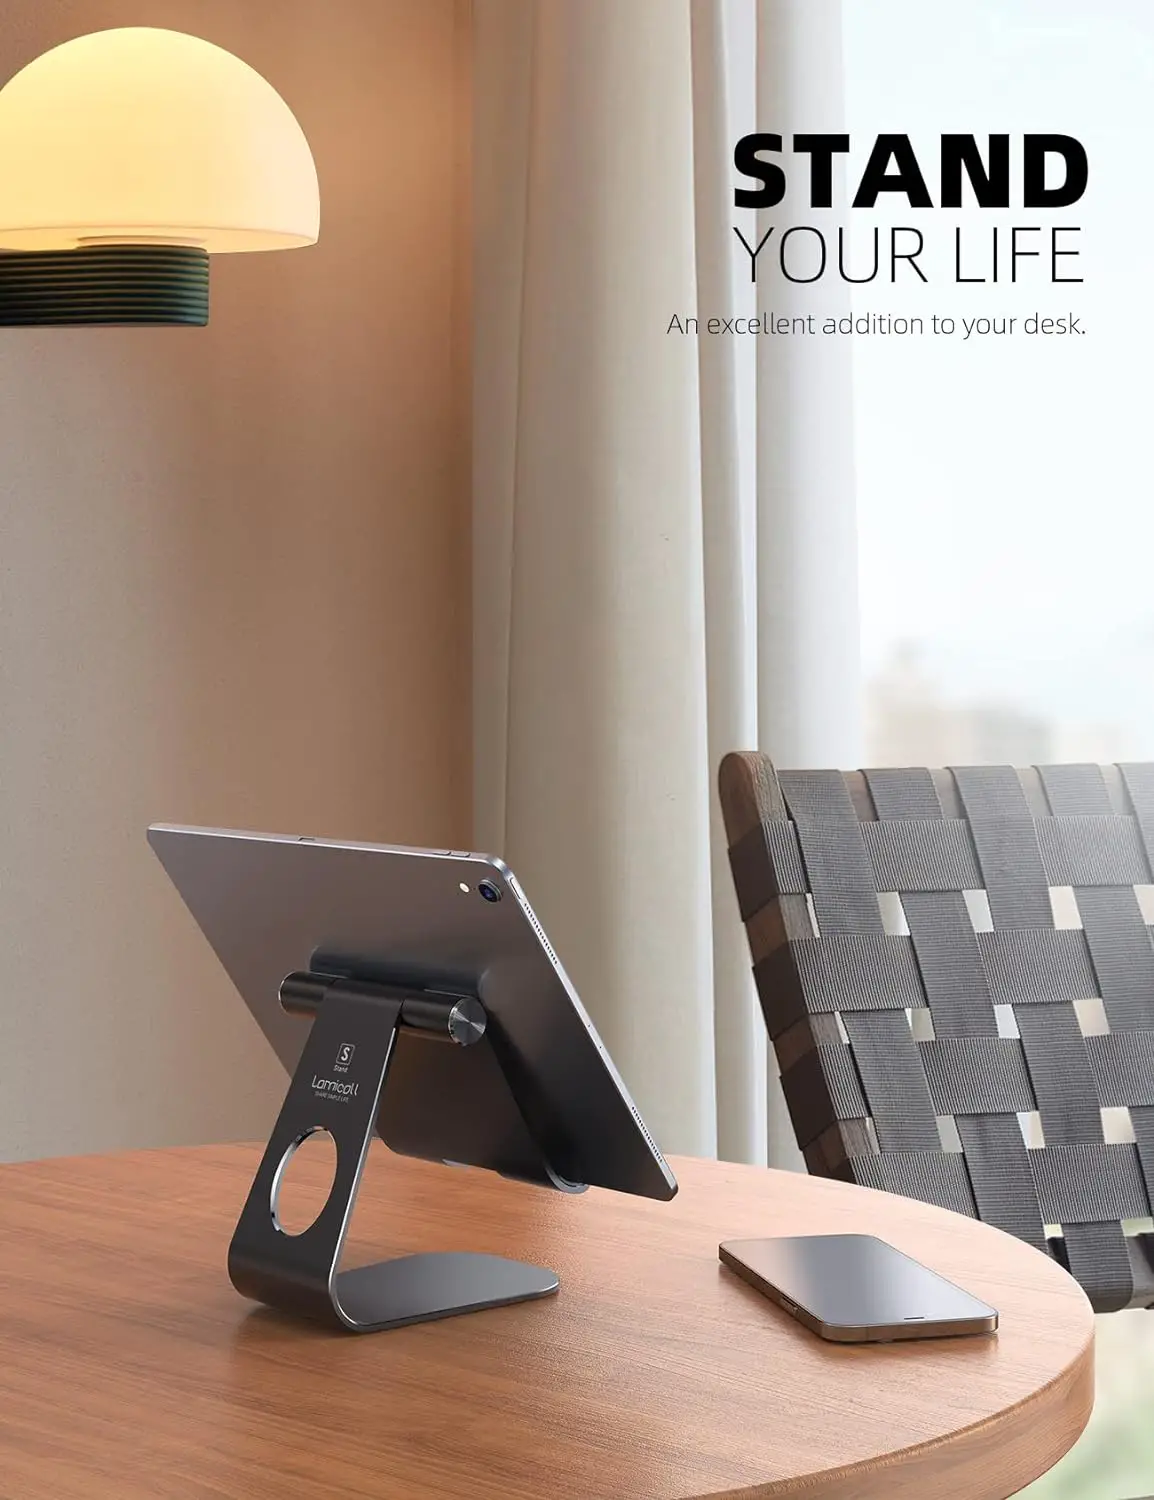 Tablet Stand Adjustable, Lamicall Tablet Stand : Desktop Stand Holder Dock Compatible with Tablet Such as iPad Pro 9.7, 10.5, 12.9 Air Mini 4 3 2, Nexus, Tab (4-13) - Silver